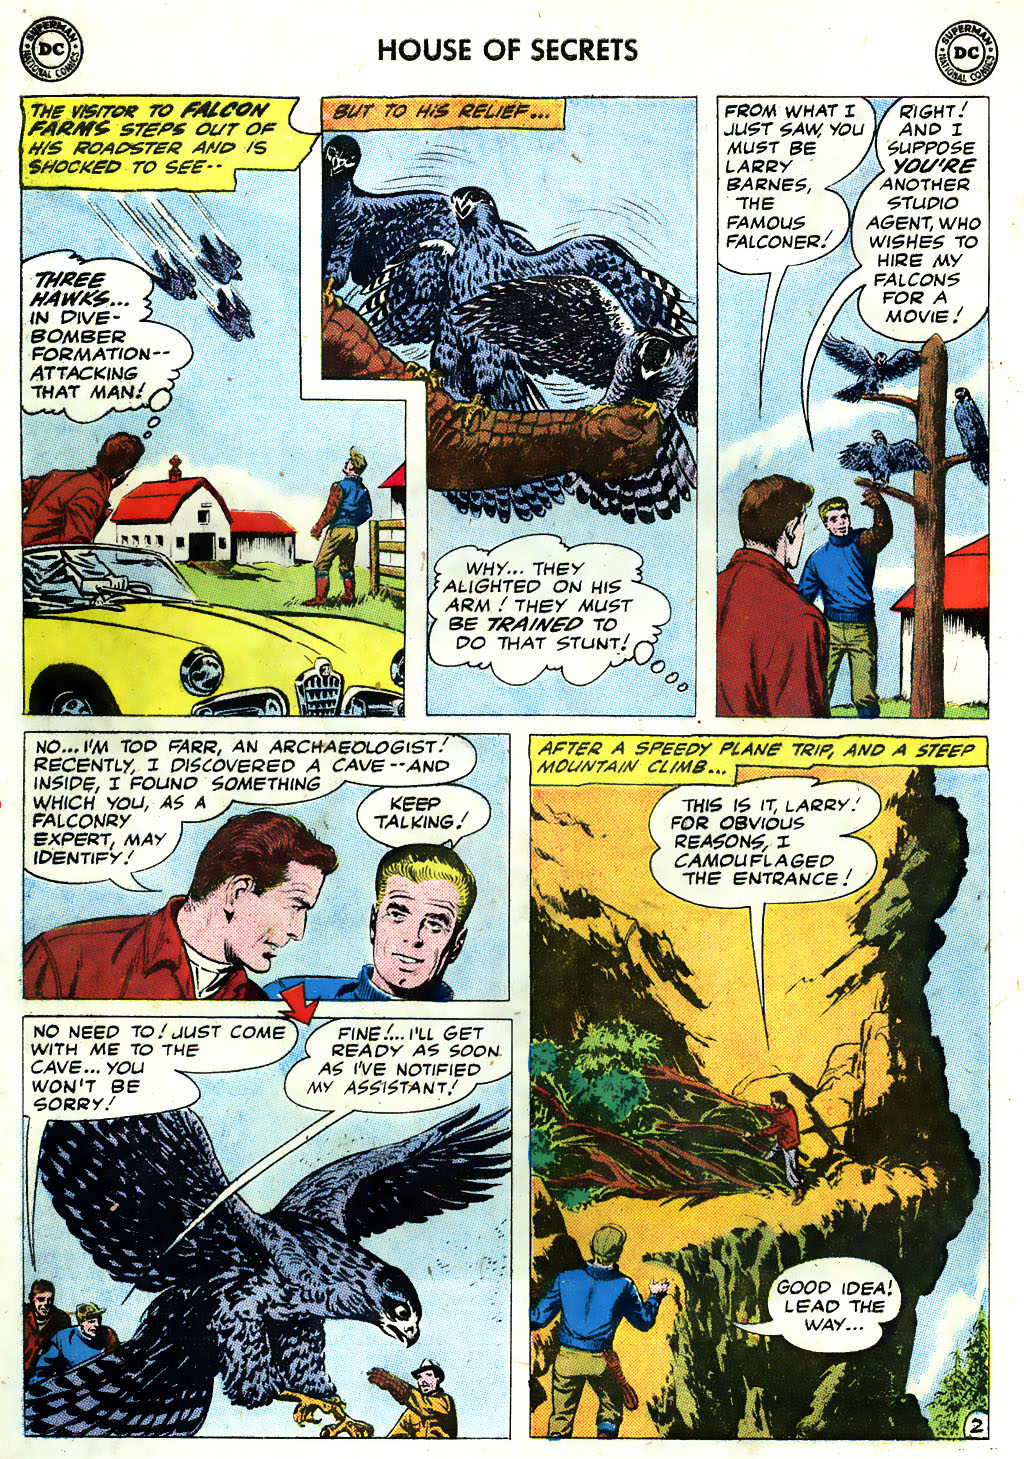 House of Secrets (1956) Issue #33 #33 - English 4